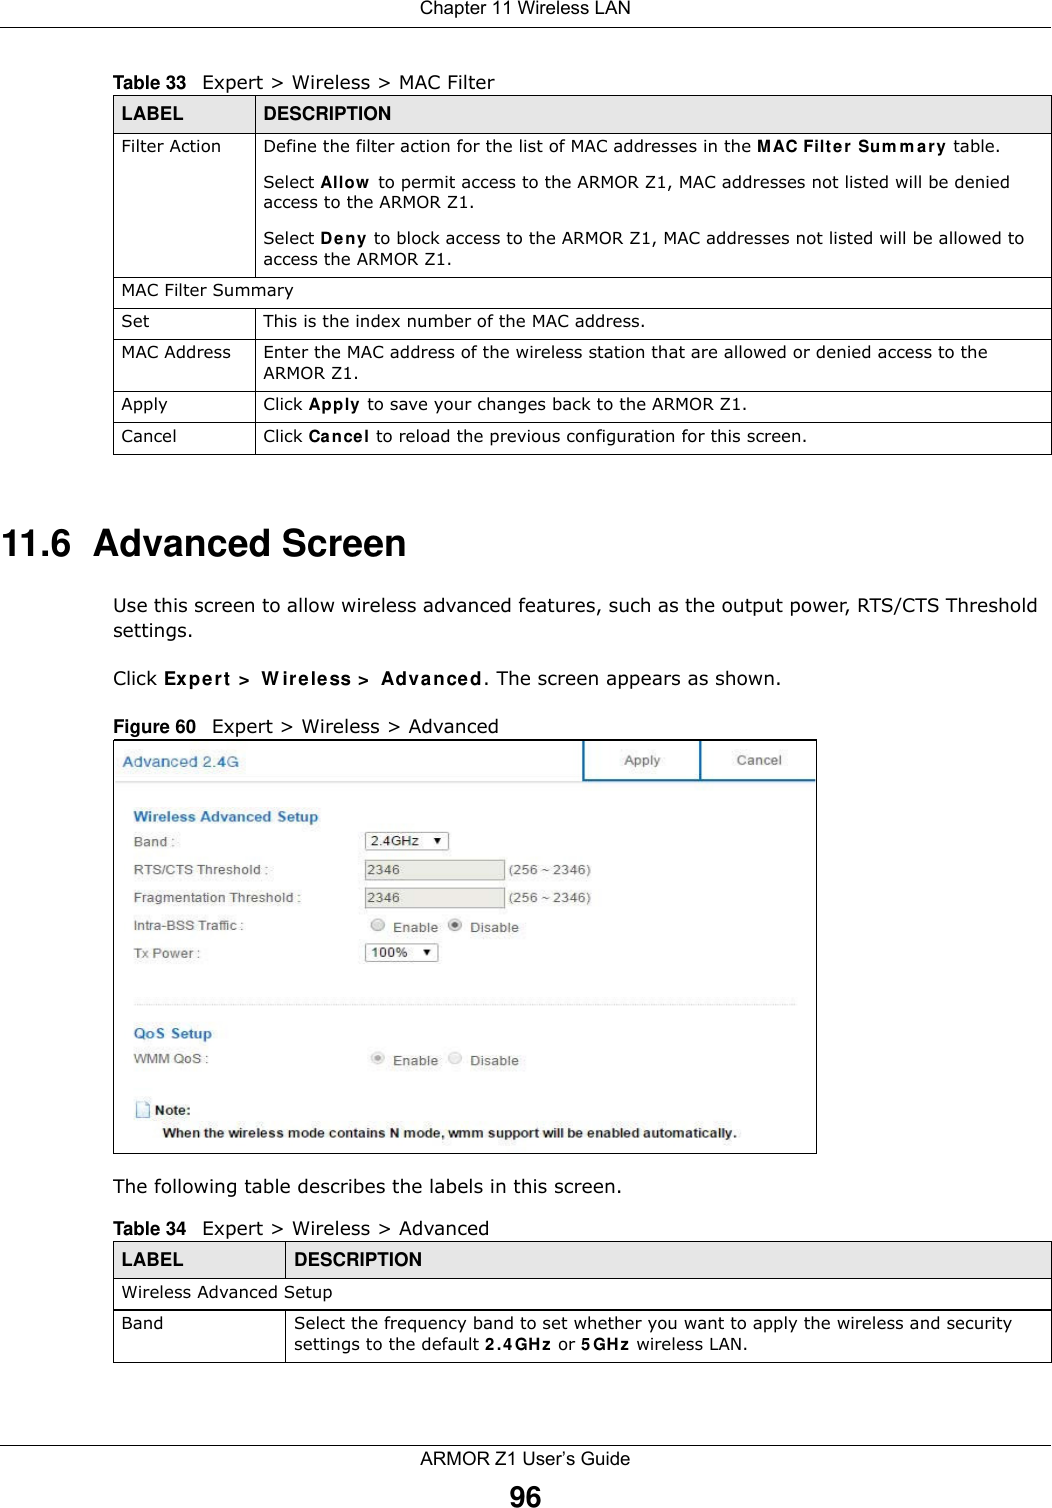 Chapter 11 Wireless LANARMOR Z1 User’s Guide9611.6  Advanced ScreenUse this screen to allow wireless advanced features, such as the output power, RTS/CTS Threshold  settings.Click Expert &gt; Wireless &gt; Advanced. The screen appears as shown.Figure 60   Expert &gt; Wireless &gt; AdvancedThe following table describes the labels in this screen. Filter Action Define the filter action for the list of MAC addresses in the MAC Filter Summary table.Select Allow to permit access to the ARMOR Z1, MAC addresses not listed will be denied access to the ARMOR Z1. Select Deny to block access to the ARMOR Z1, MAC addresses not listed will be allowed to access the ARMOR Z1. MAC Filter SummarySet This is the index number of the MAC address.MAC Address Enter the MAC address of the wireless station that are allowed or denied access to the ARMOR Z1.Apply Click Apply to save your changes back to the ARMOR Z1.Cancel Click Cancel to reload the previous configuration for this screen.Table 33   Expert &gt; Wireless &gt; MAC FilterLABEL DESCRIPTIONTable 34   Expert &gt; Wireless &gt; AdvancedLABEL DESCRIPTIONWireless Advanced SetupBand Select the frequency band to set whether you want to apply the wireless and security settings to the default 2.4GHz or 5GHz wireless LAN. 